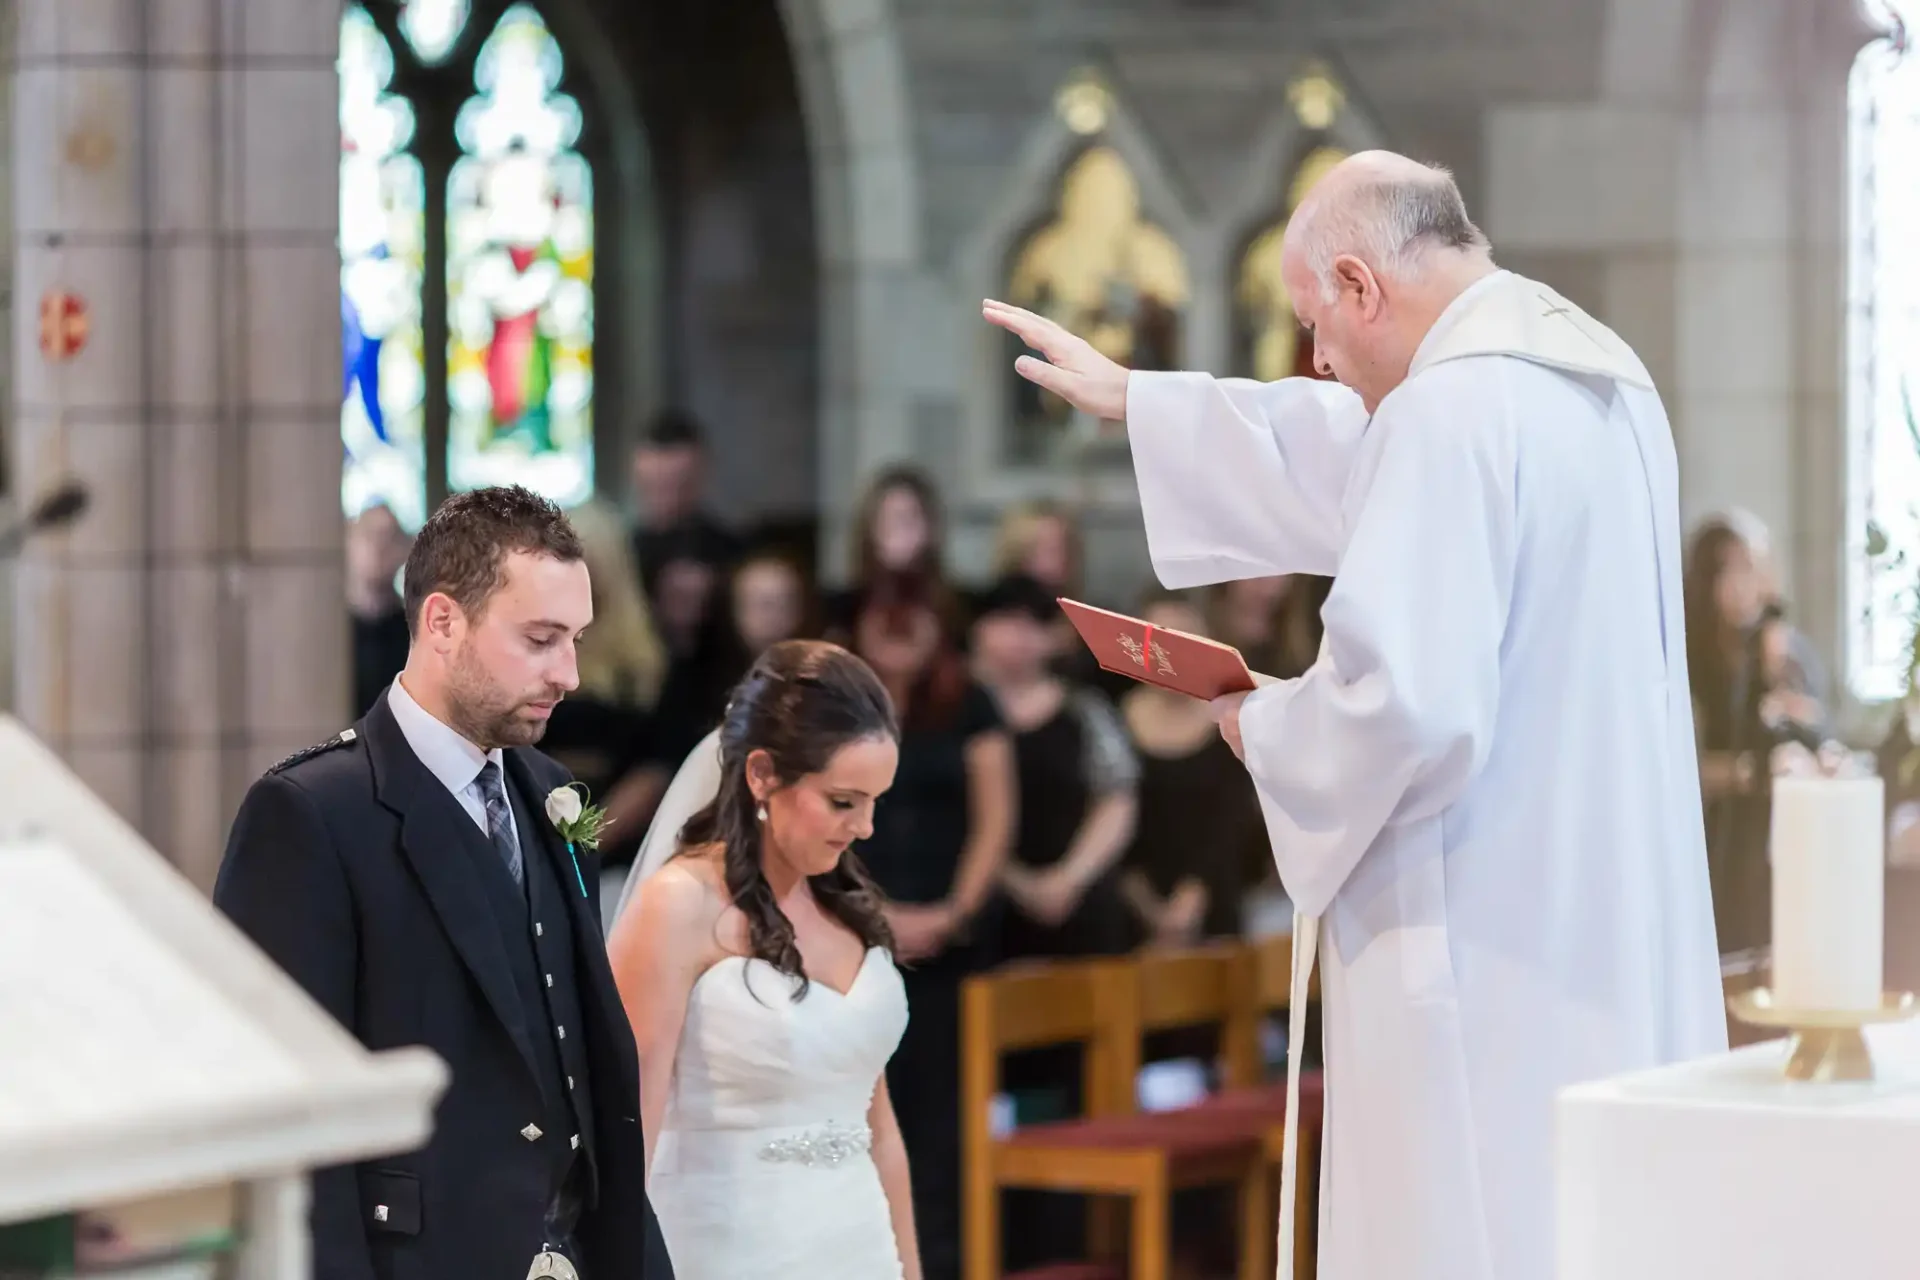 A priest conducting a wedding ceremony blesses a couple standing at the altar in a church, with guests in the background.